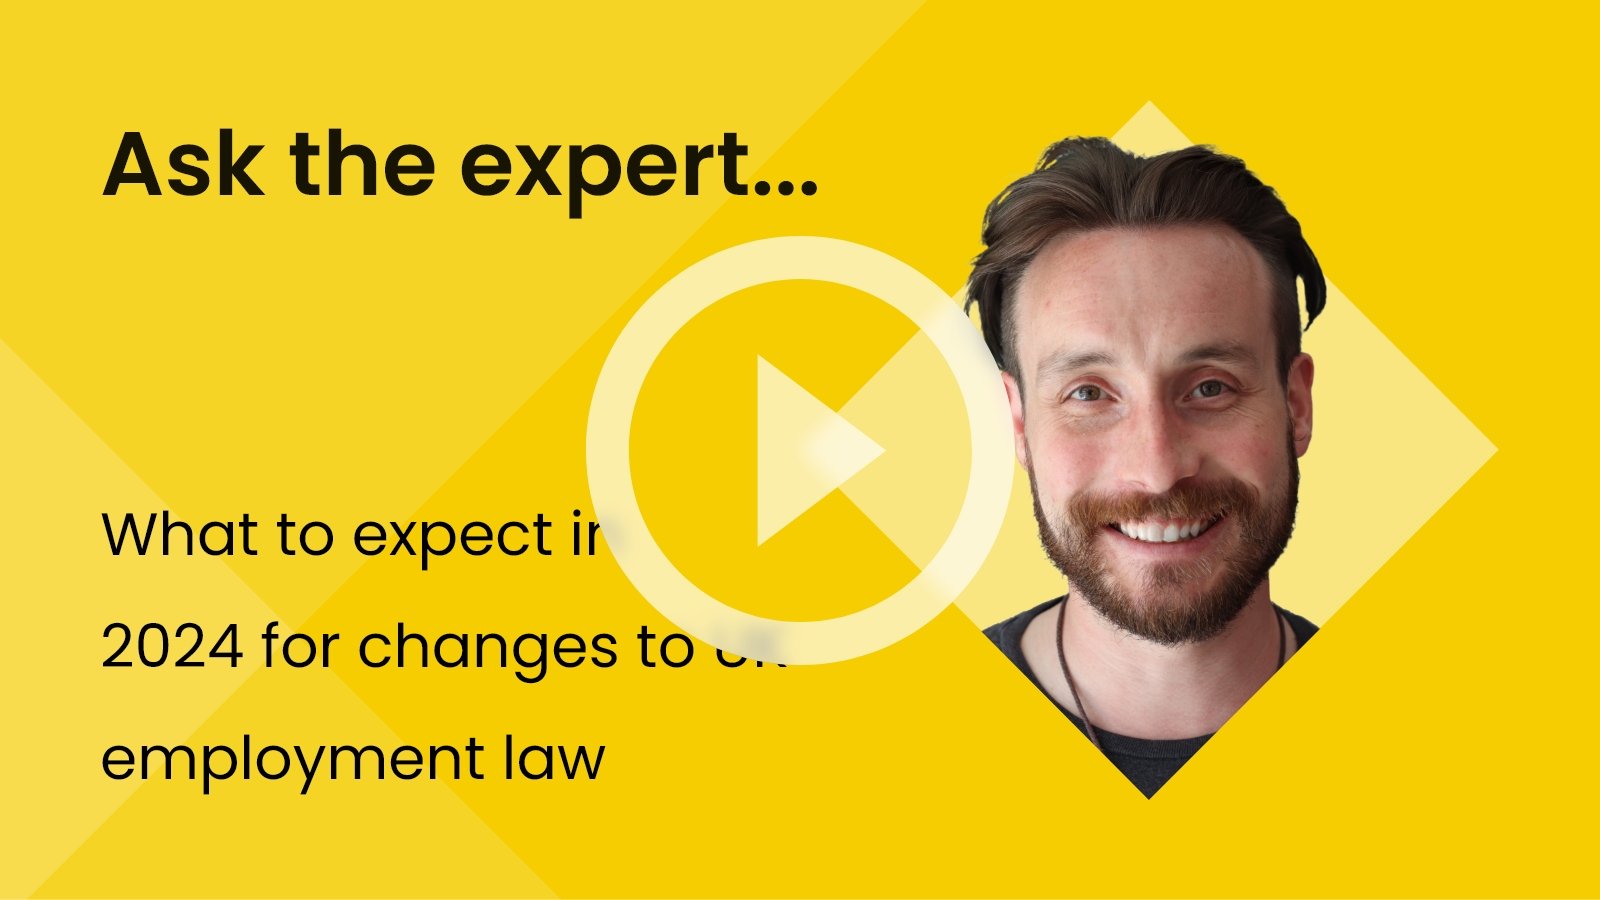 Elliot Burton discusses the upcoming changes to employment law in 2024